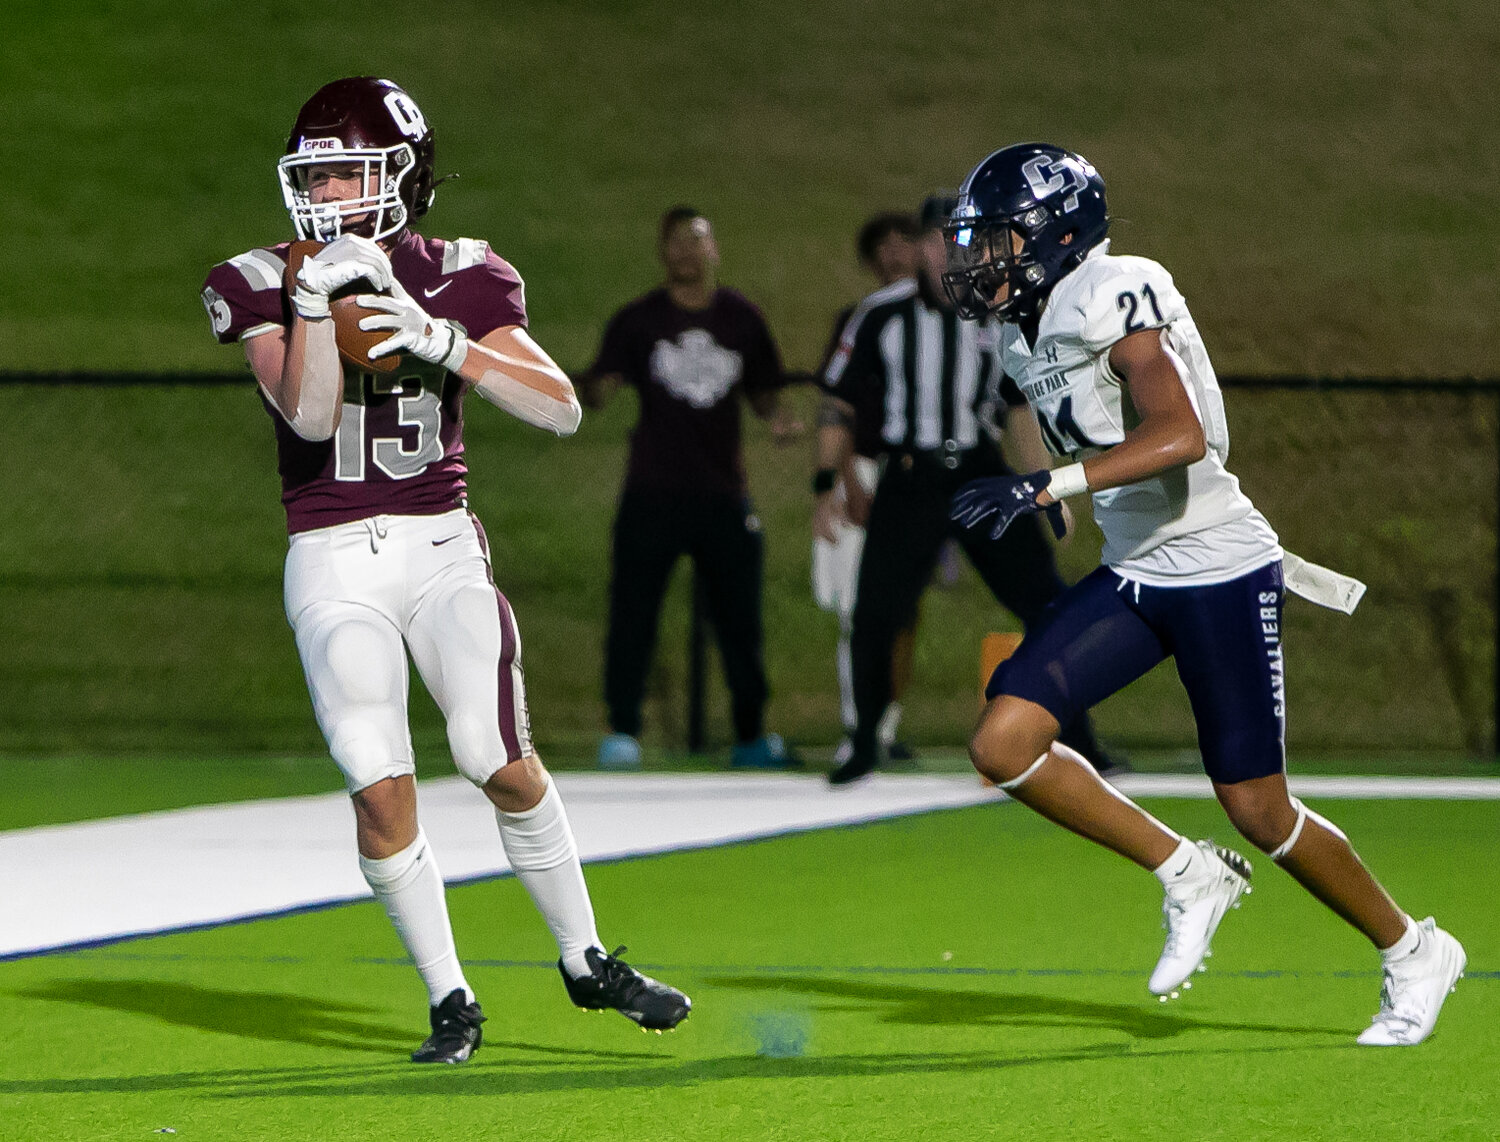 Drew Tureau brings in a 2-point conversion during Friday's game between Cinco Ranch and College Park at Rhodes Stadium.